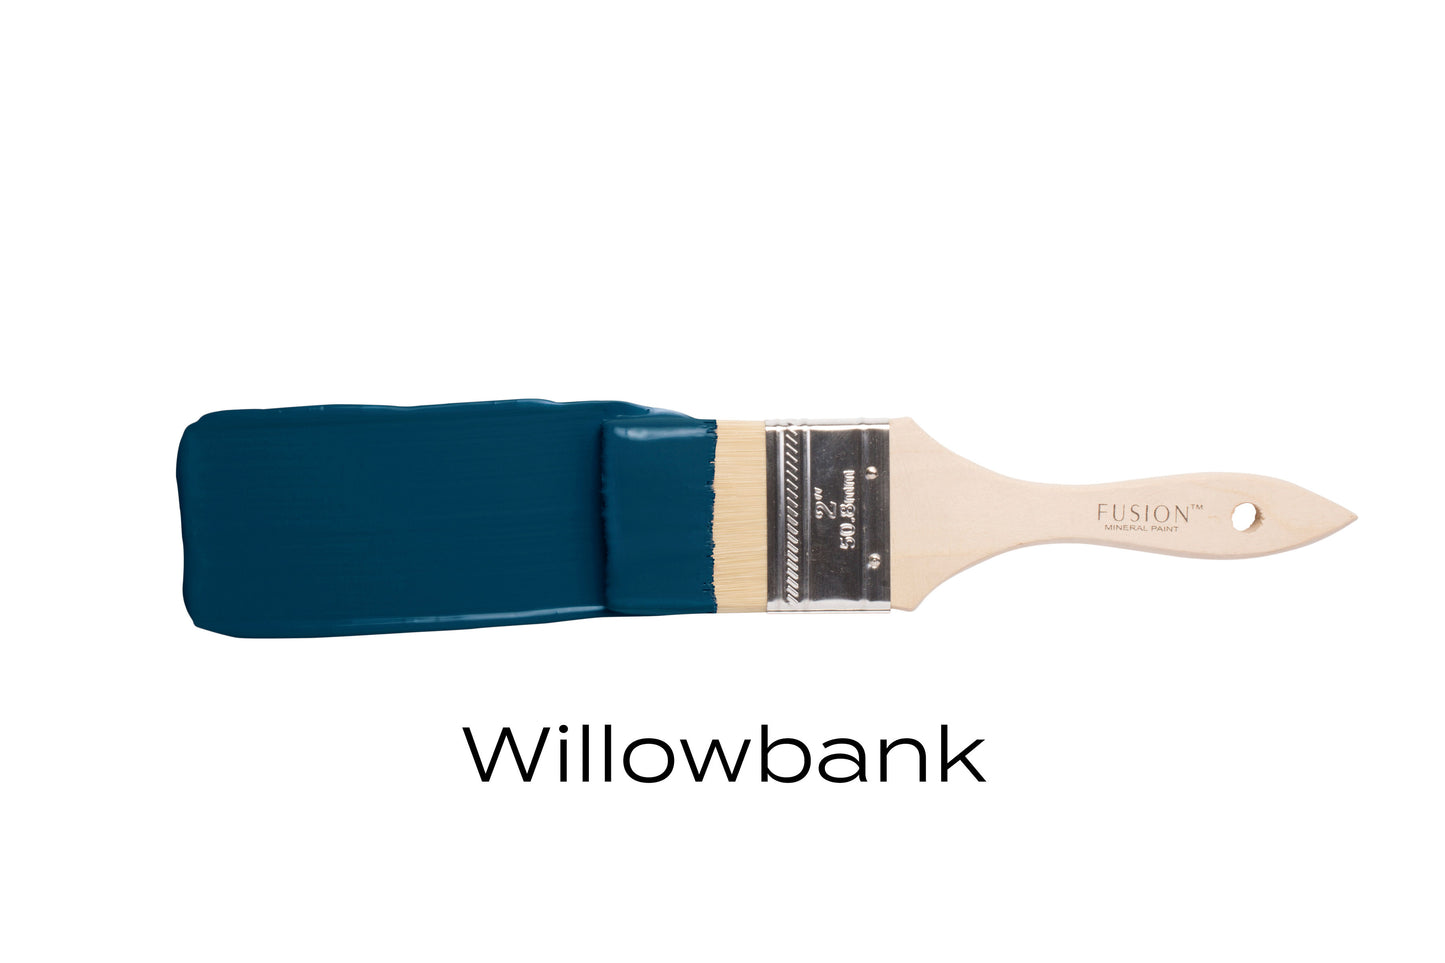 WILLOWBANK - FUSION MINERAL  PAINT - SUMMER 2022